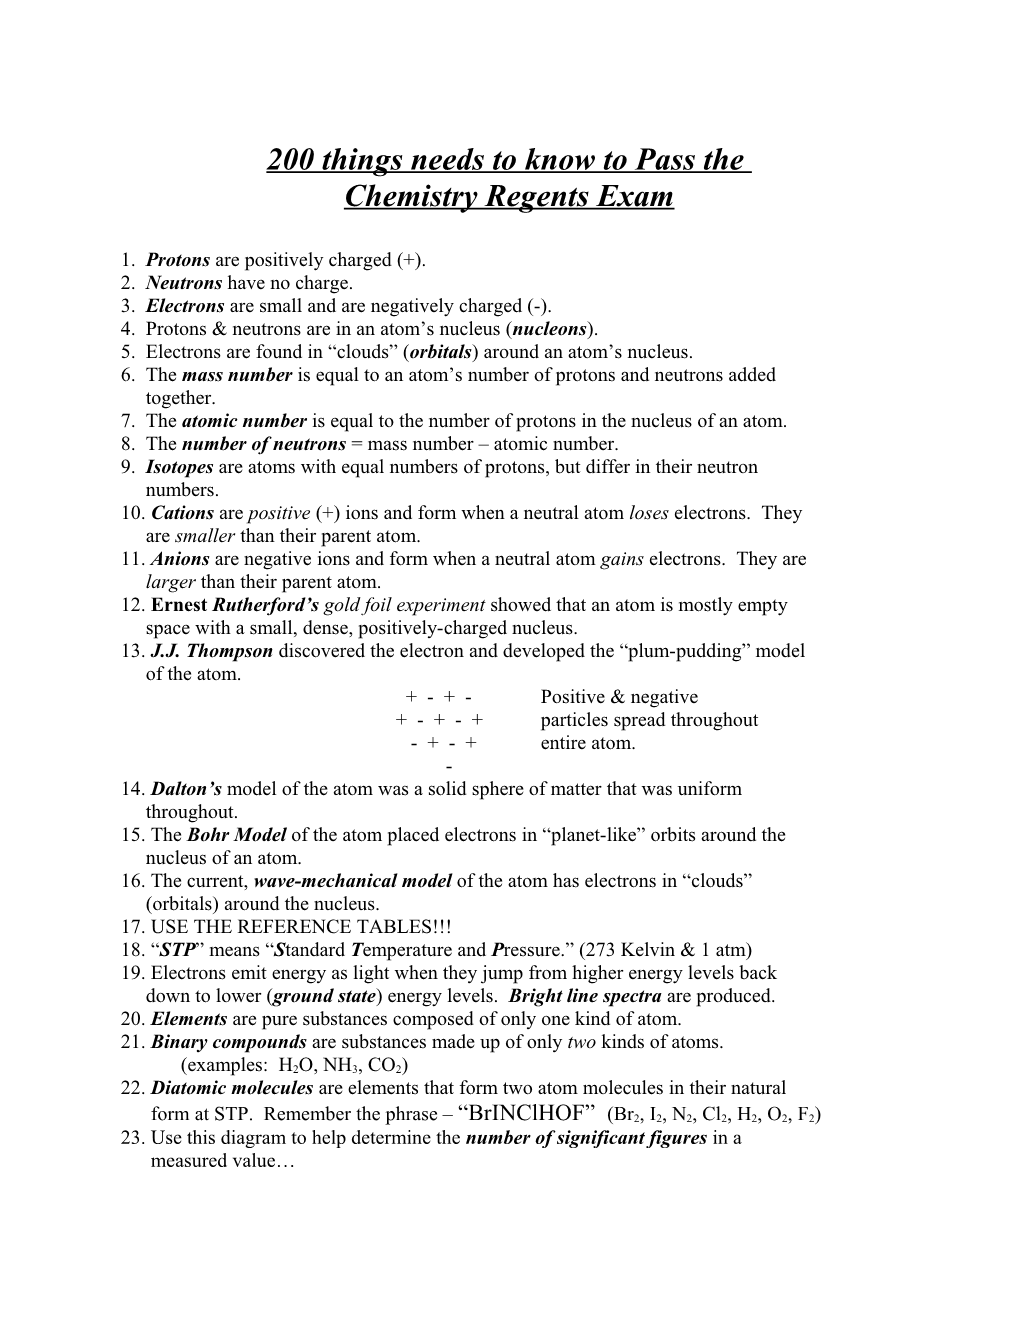 200 Ways to Pass the Chemistry